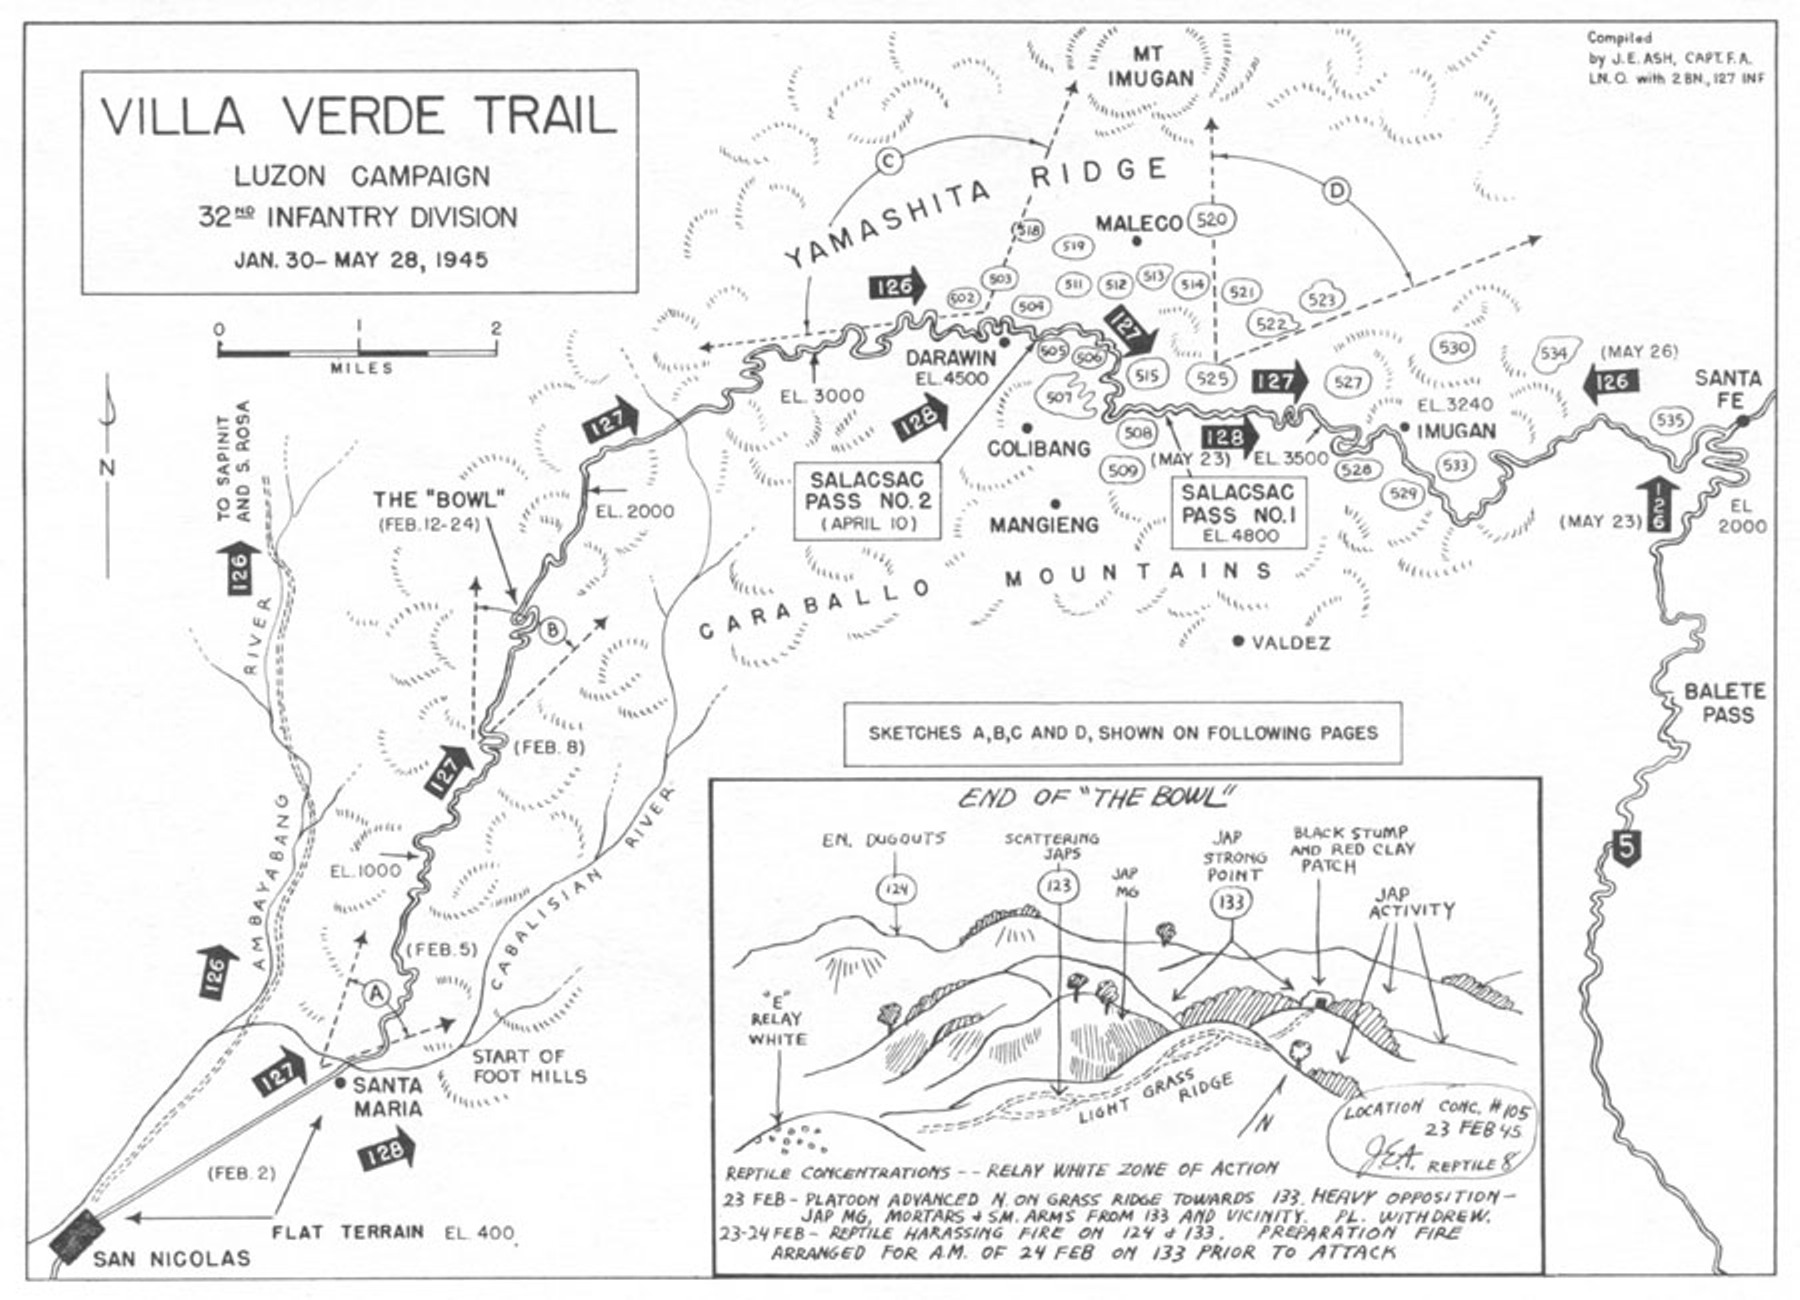 Map of the Villa Verde trail used by the US 32nd Infantry Division during the Luzon Campaign, Jan 30 through May 28, 1945